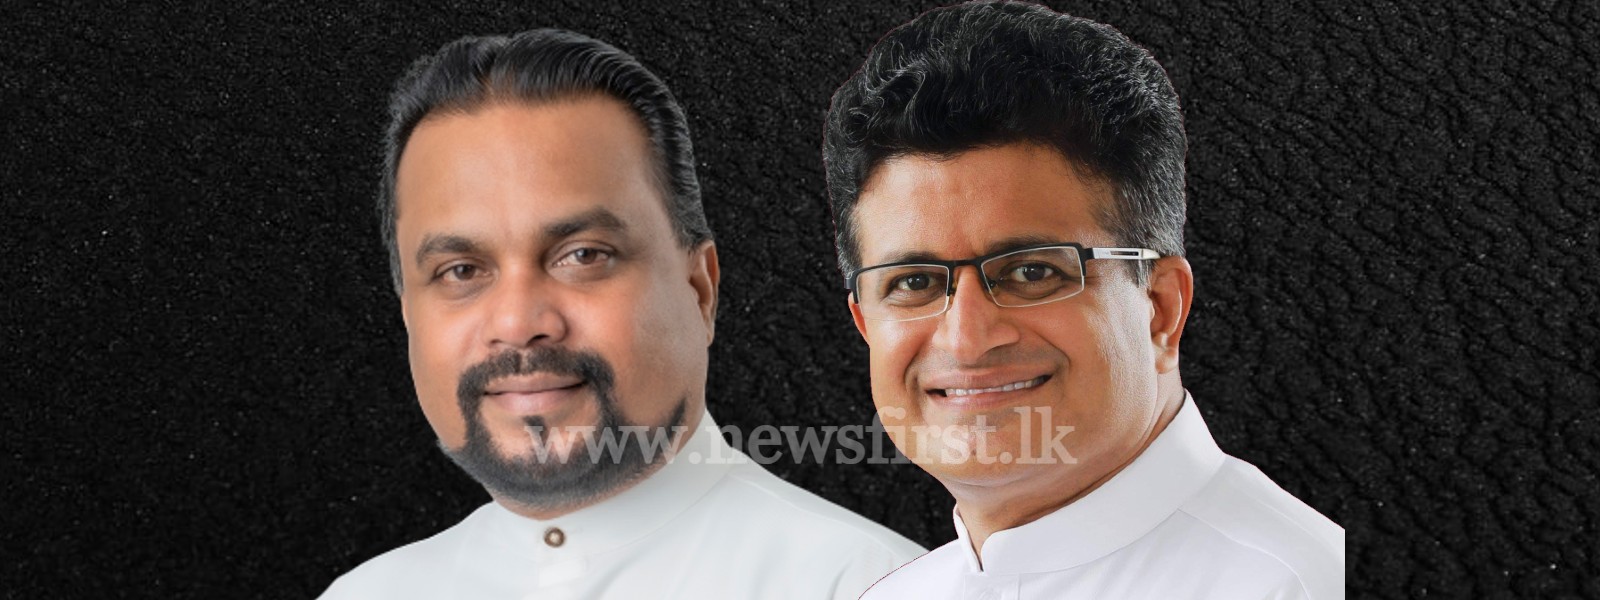 Wimal & Gammanpila removed from positions by President